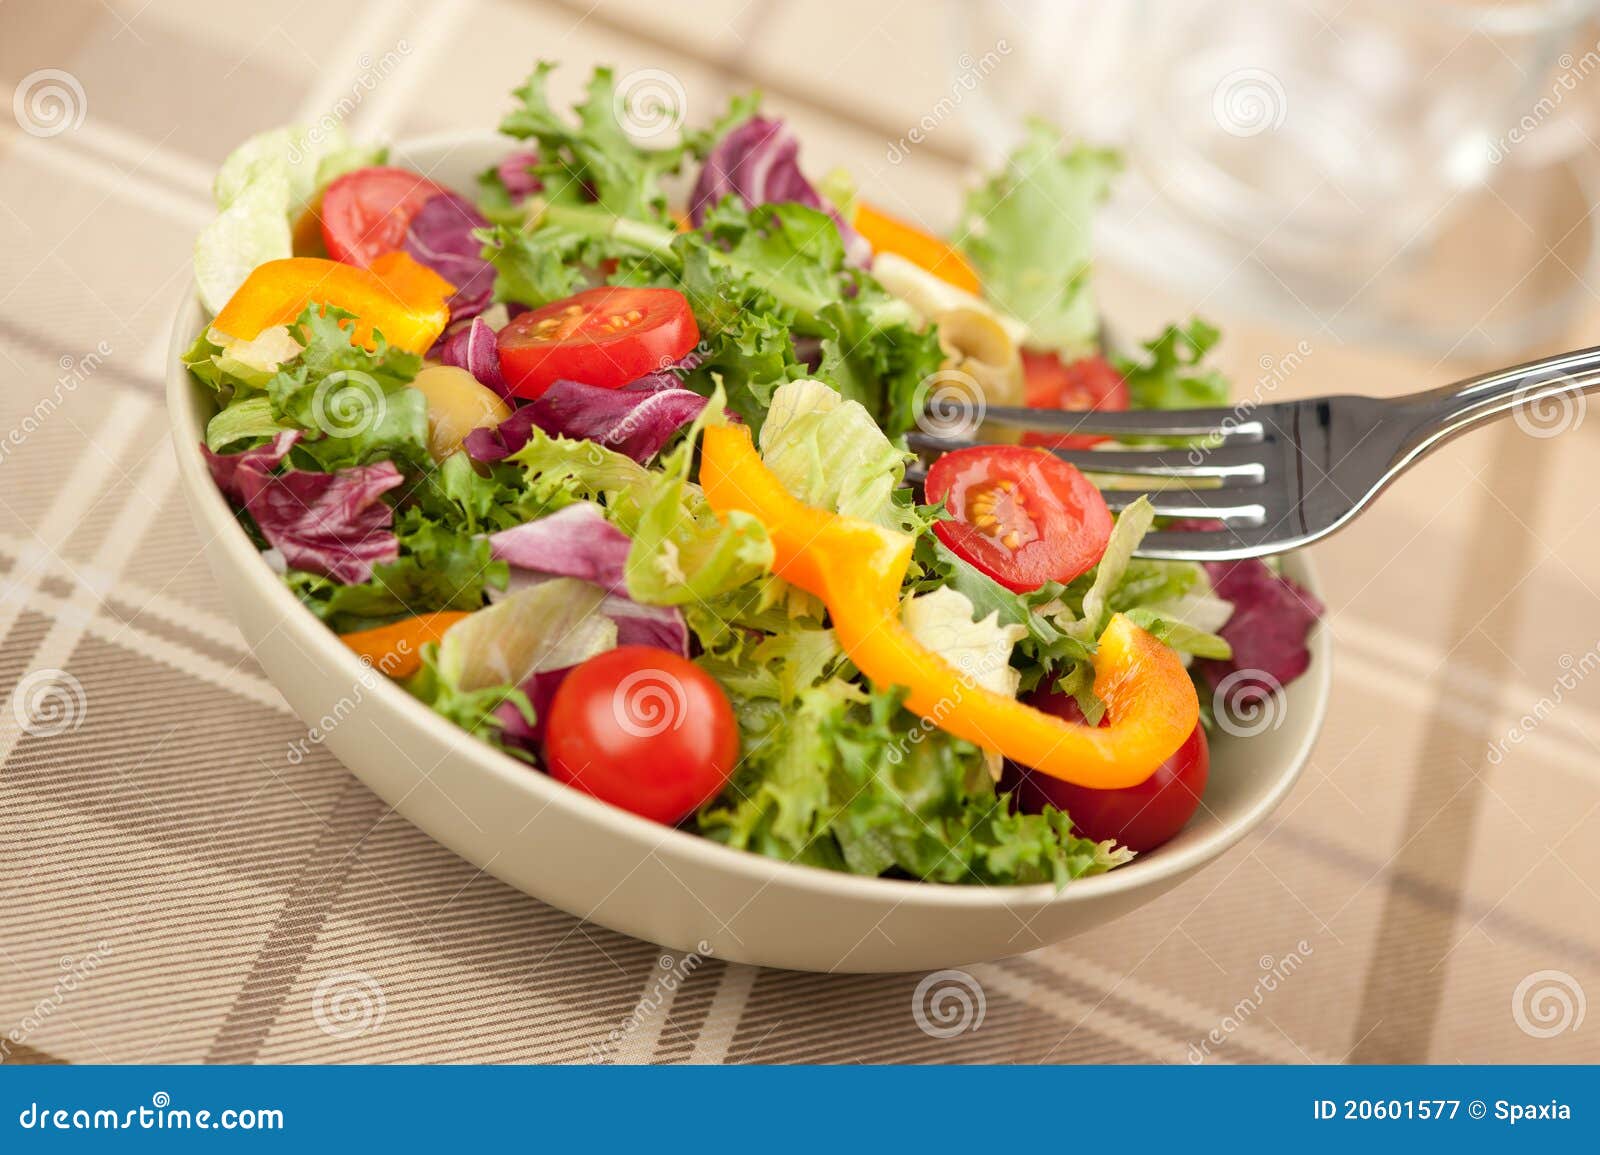 Salad with vegetables stock image. Image of food, diet - 20601577